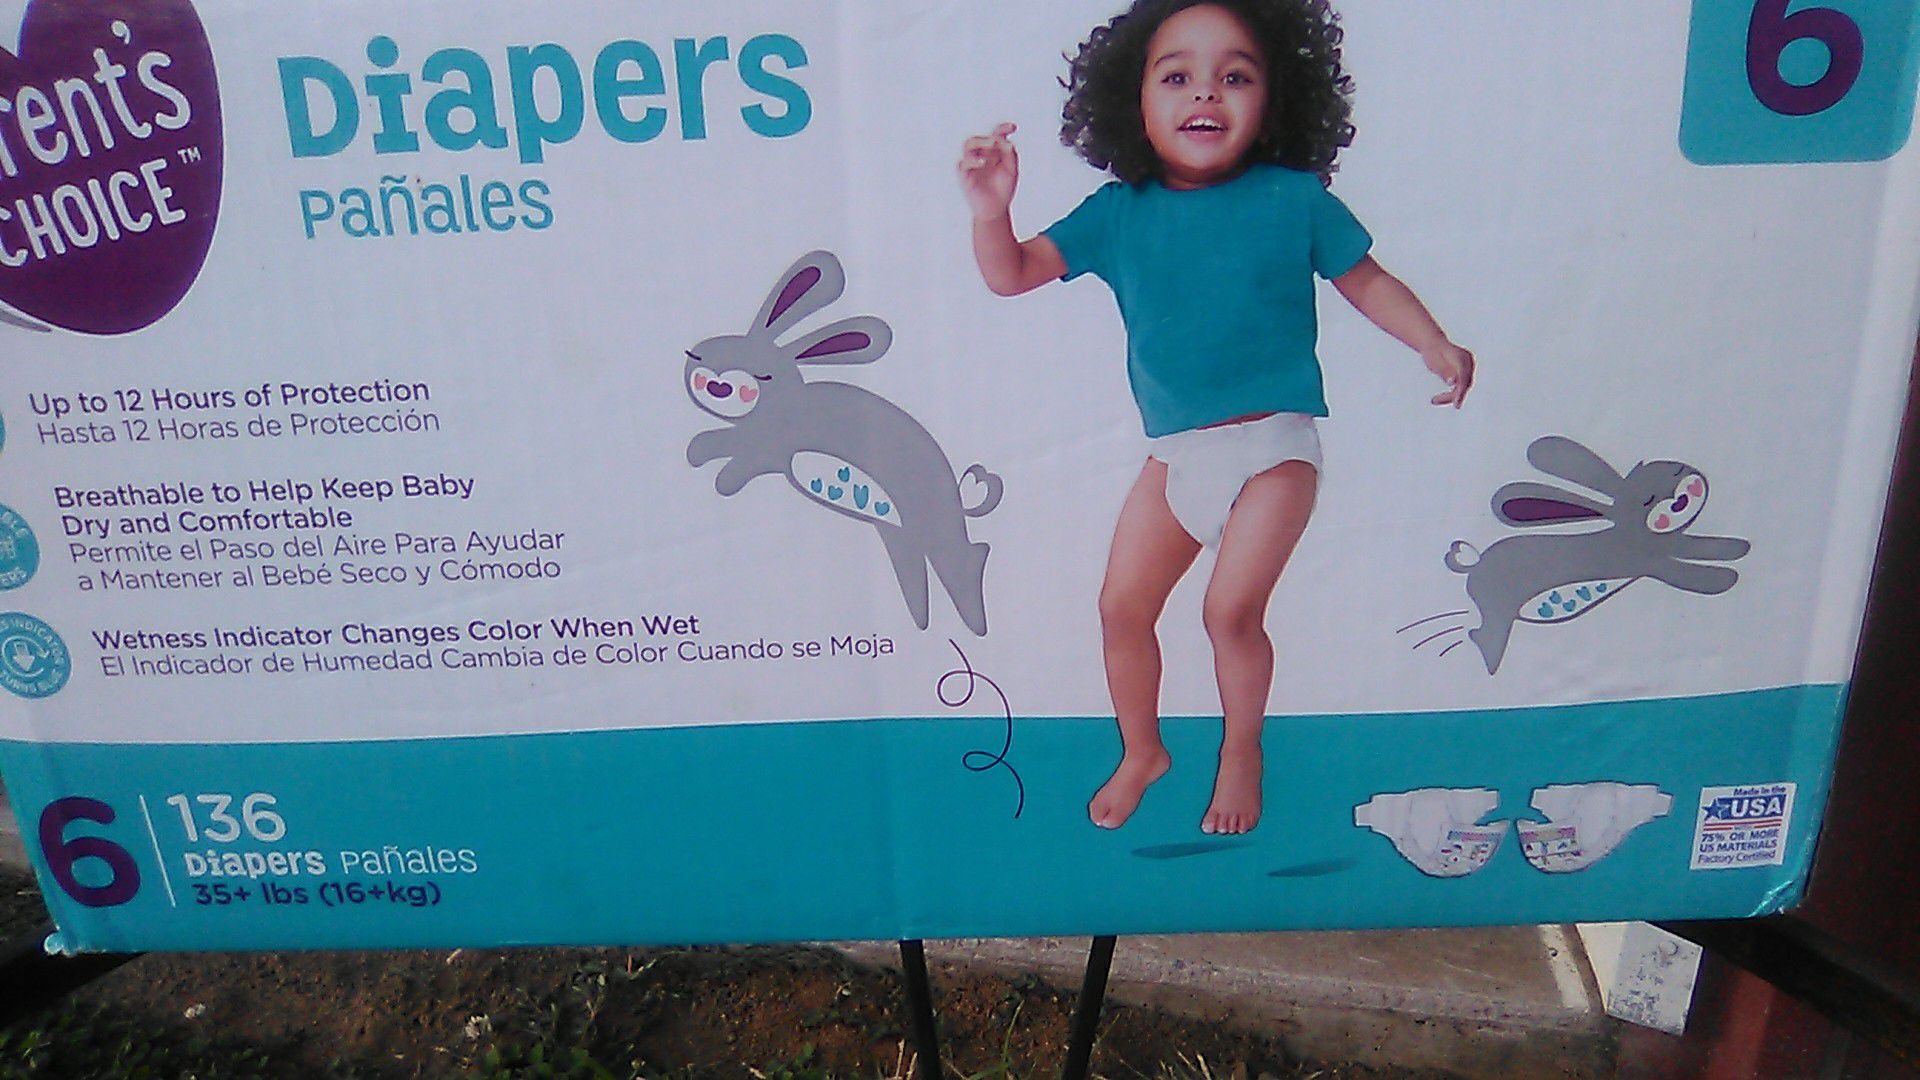 Size 6 diapers